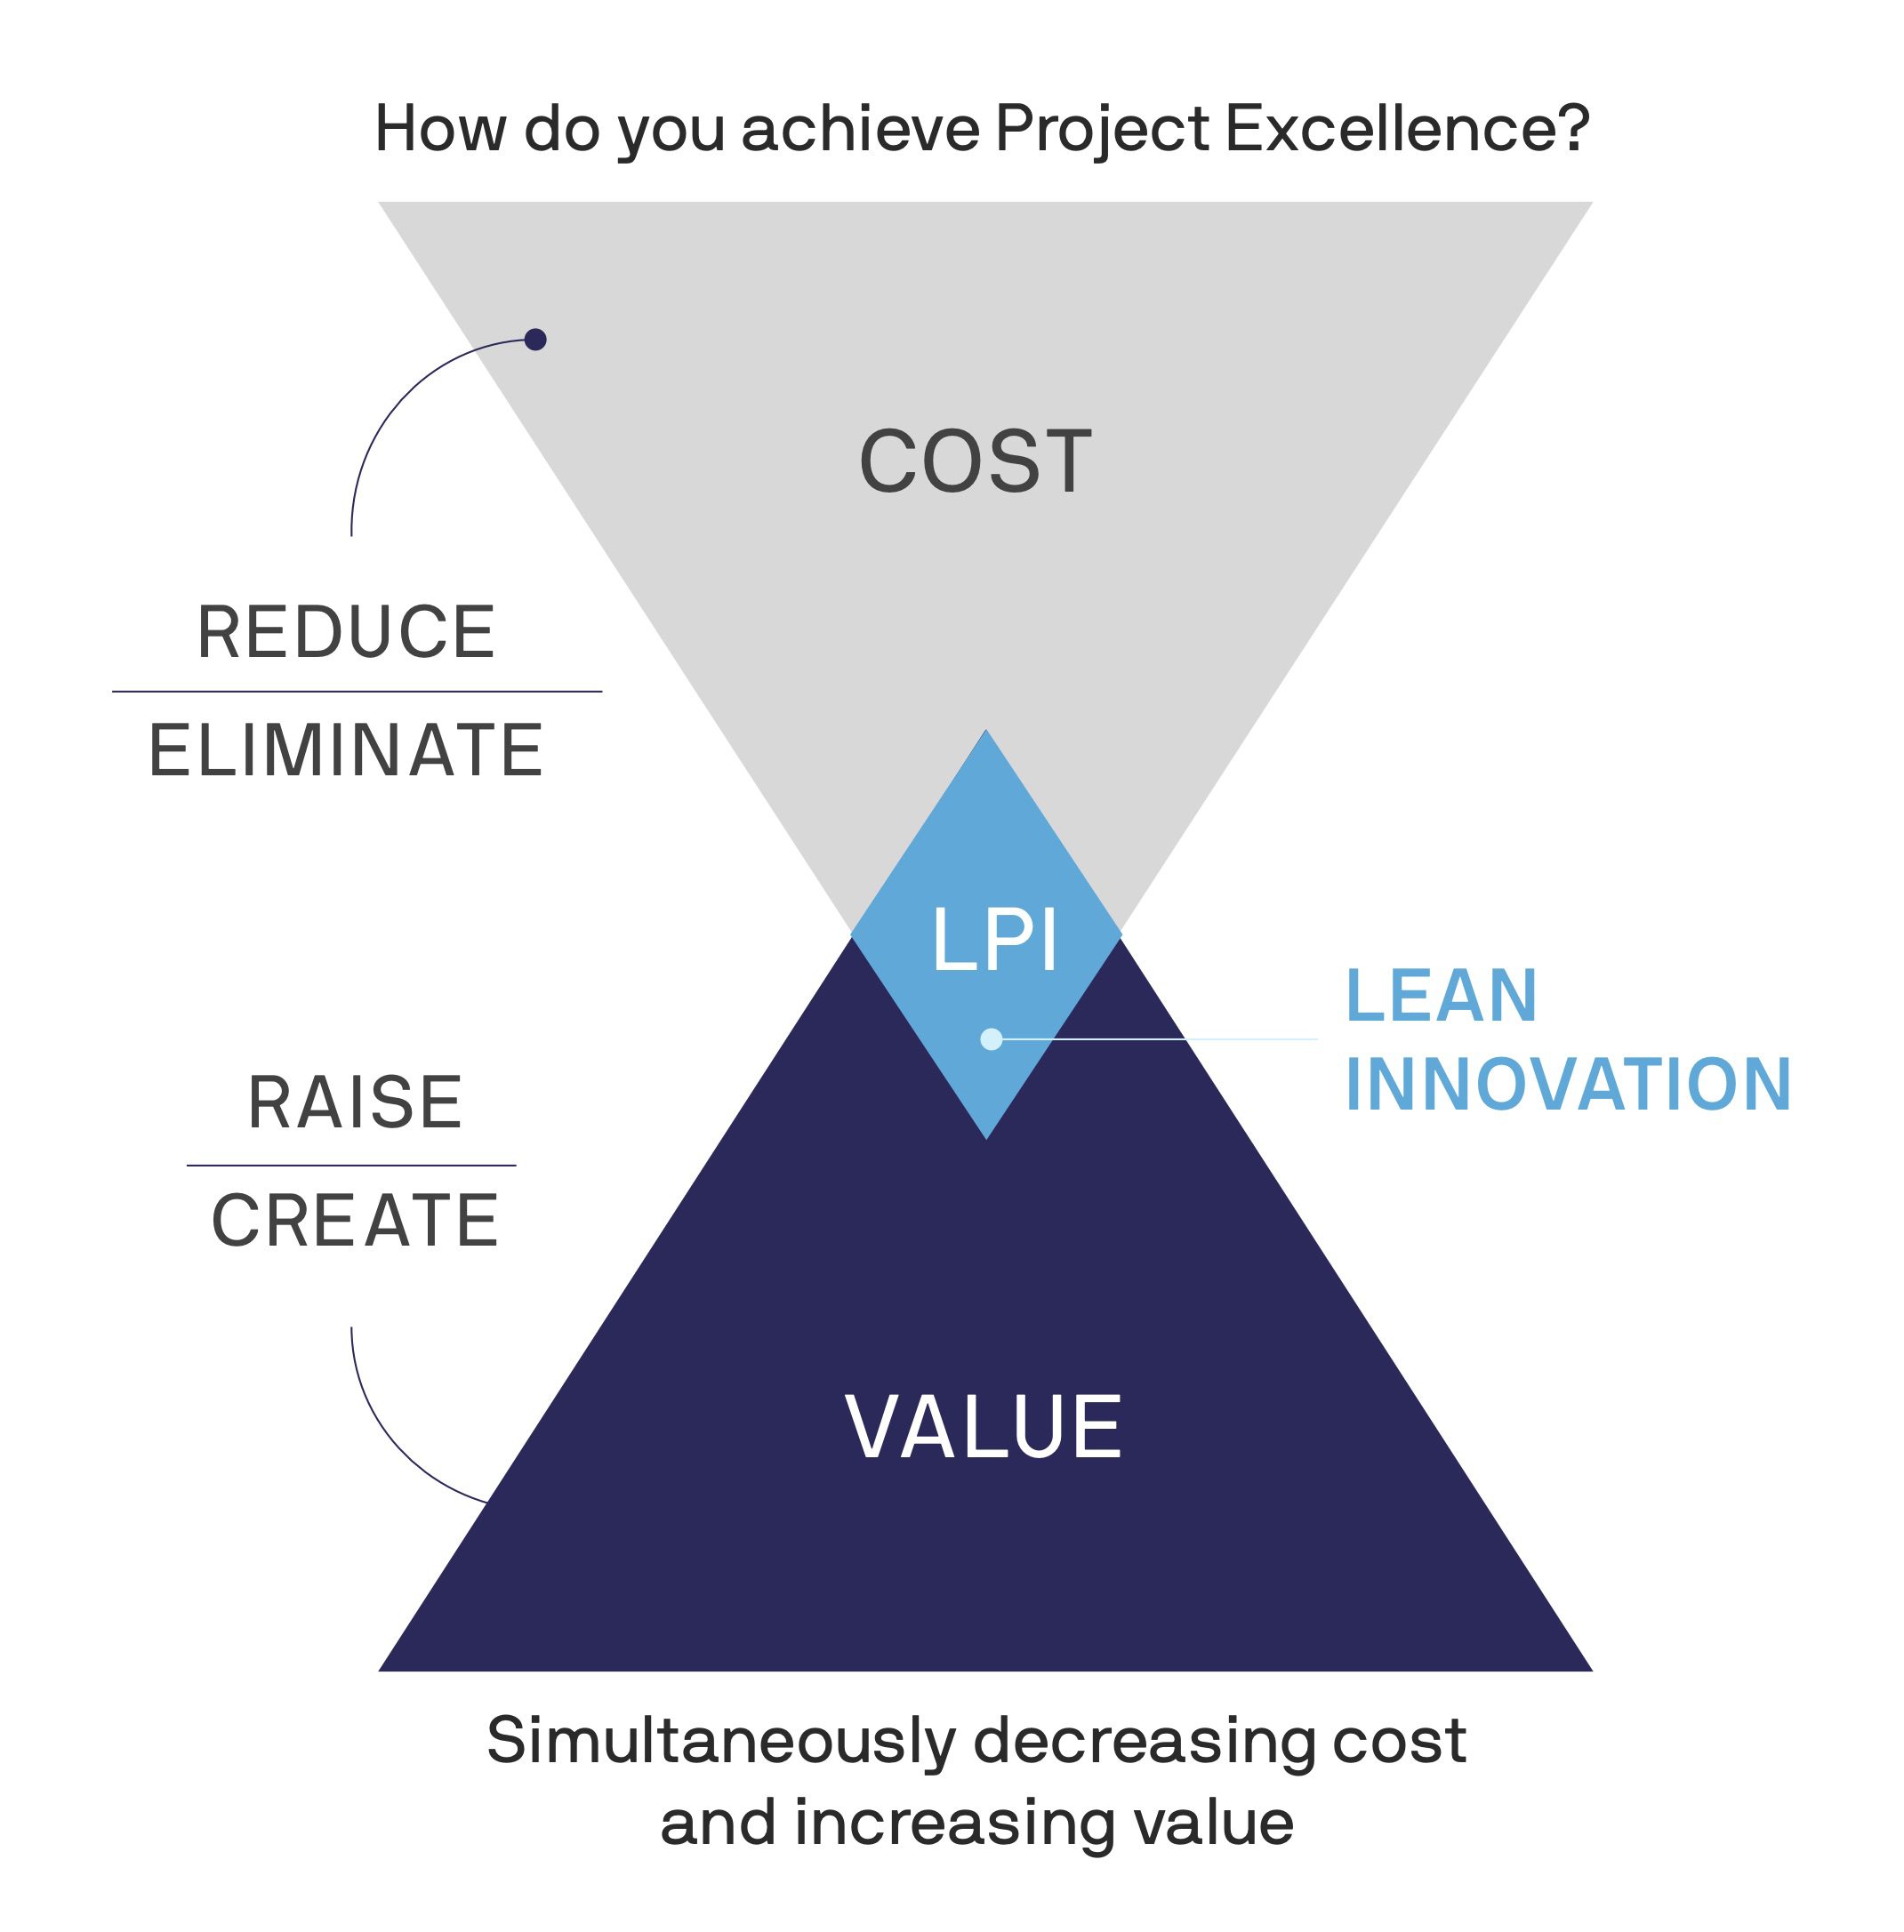 Legami and value chain innovation